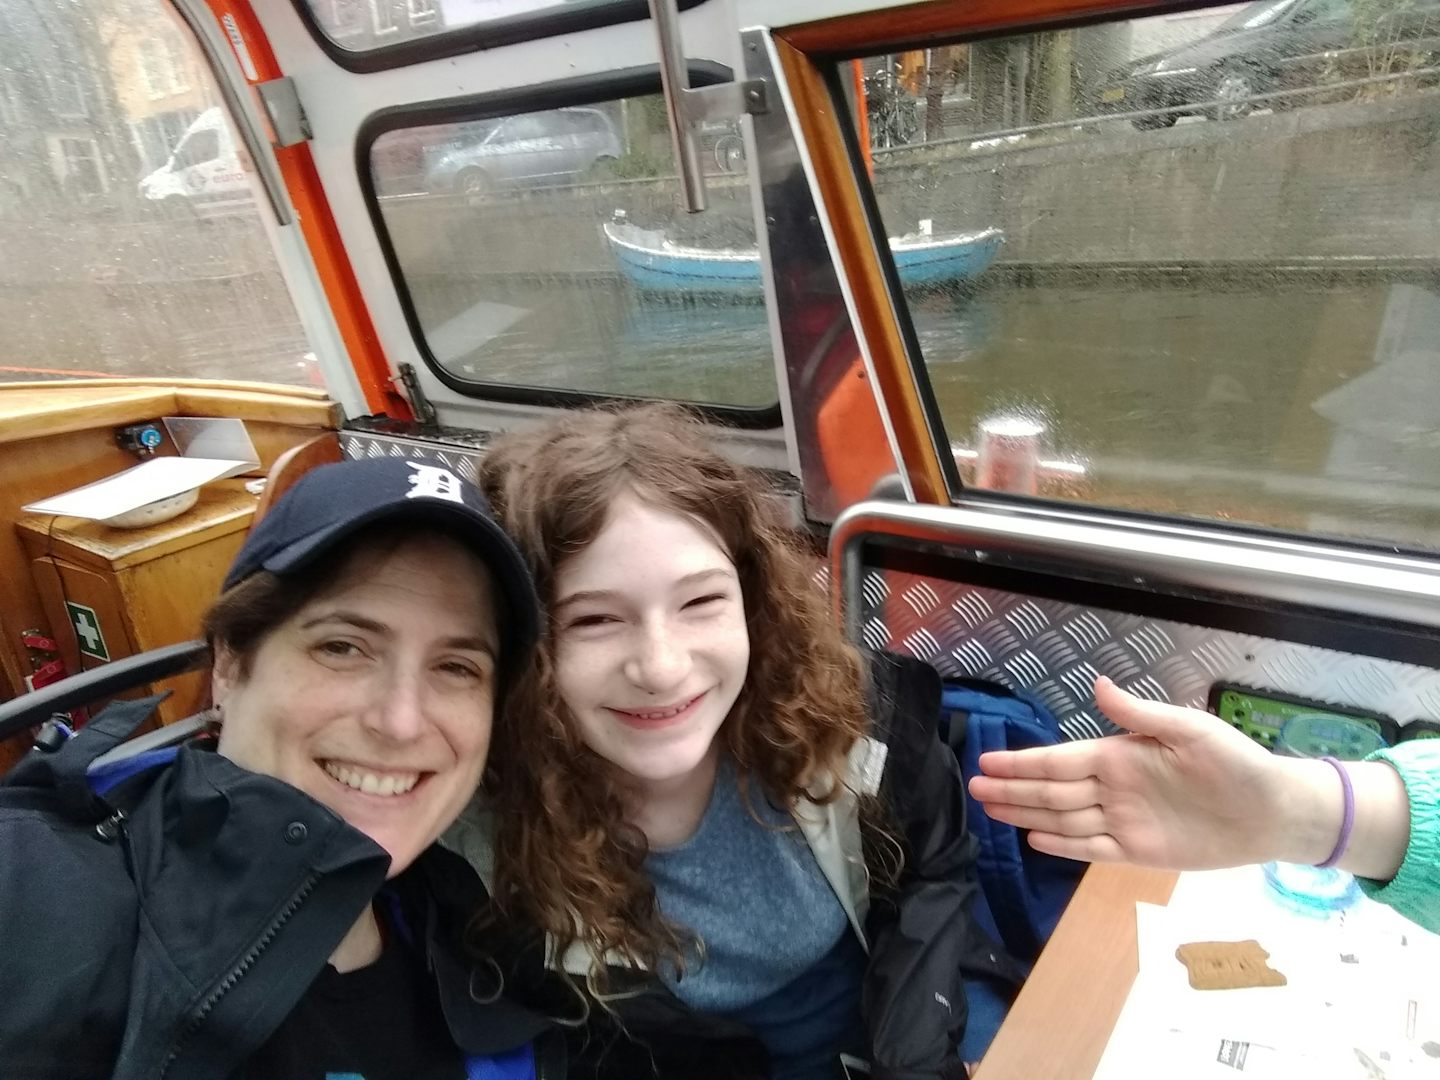 Amsterdam canal boat tour